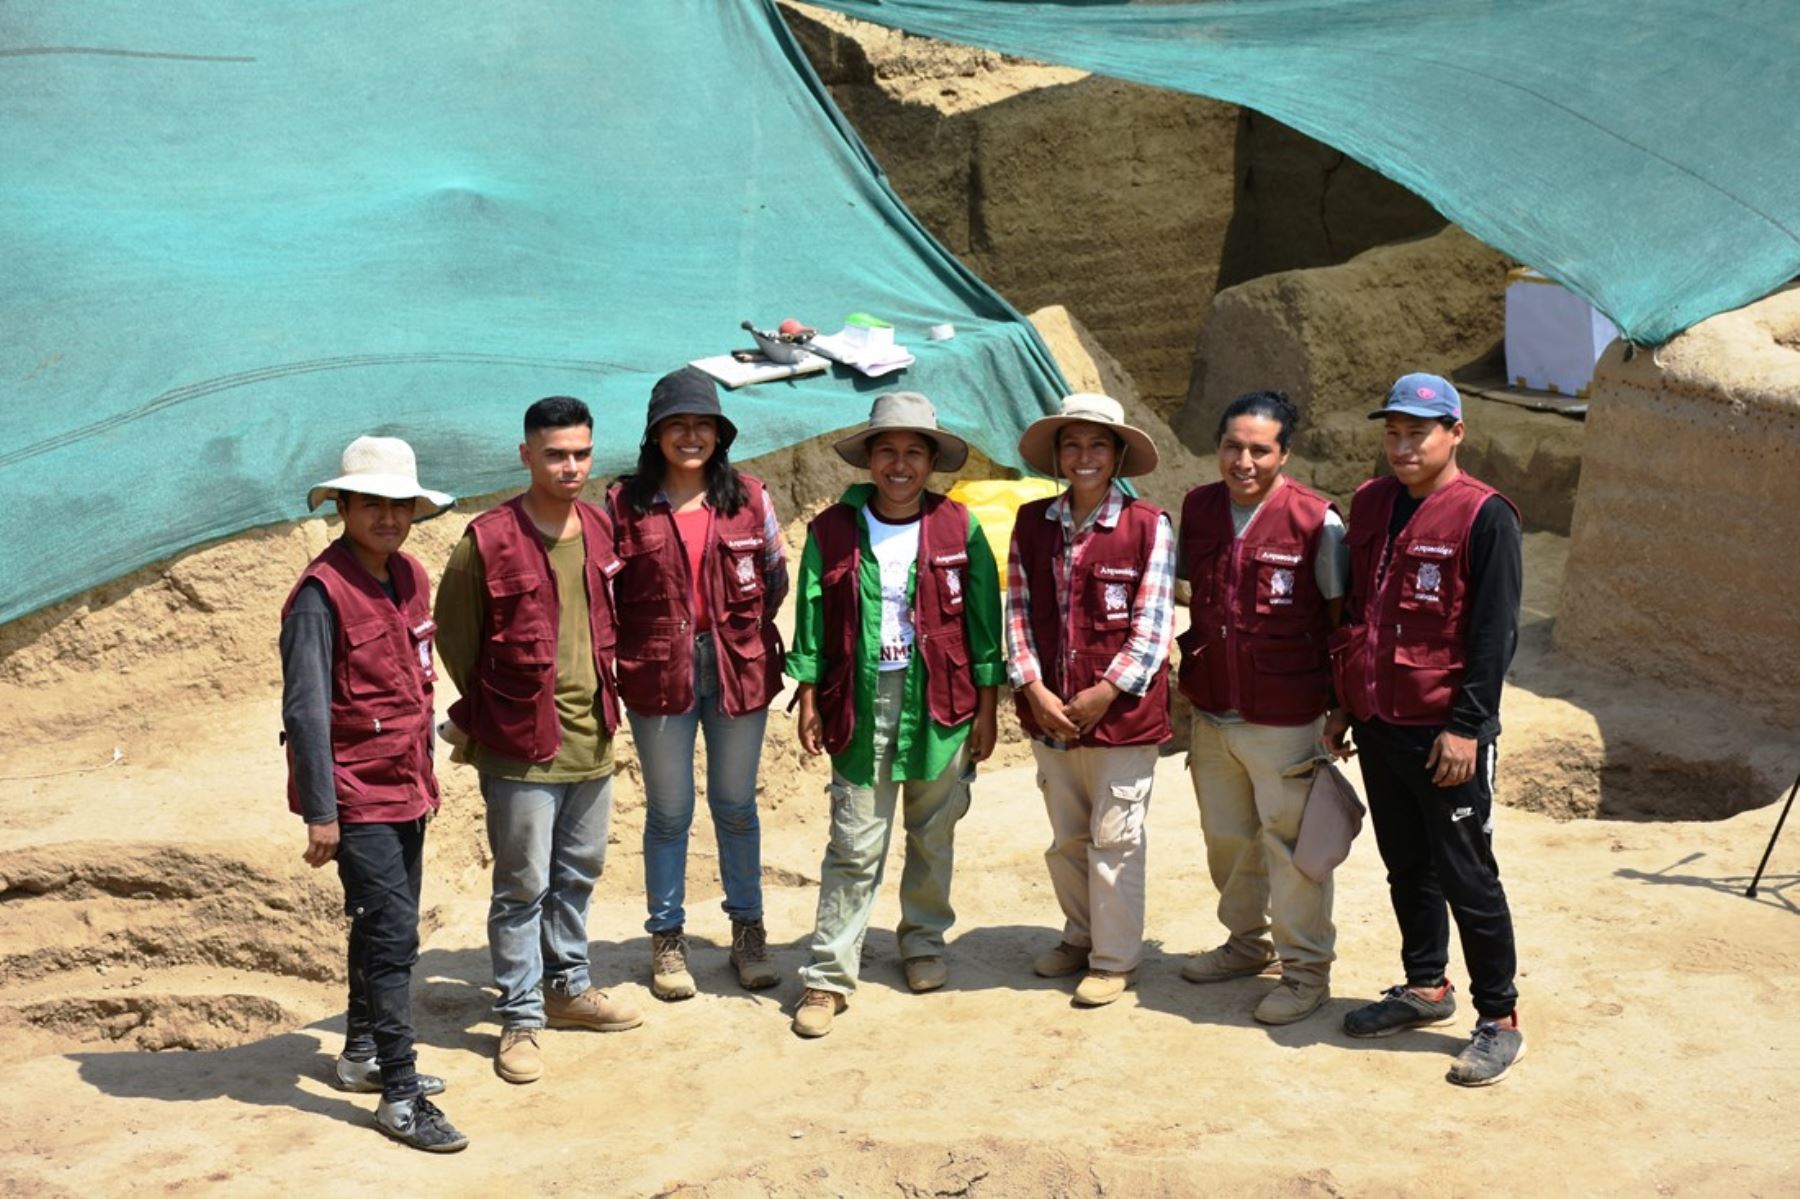 The members of the team responsible for the recent discovery in Cajamarquilla